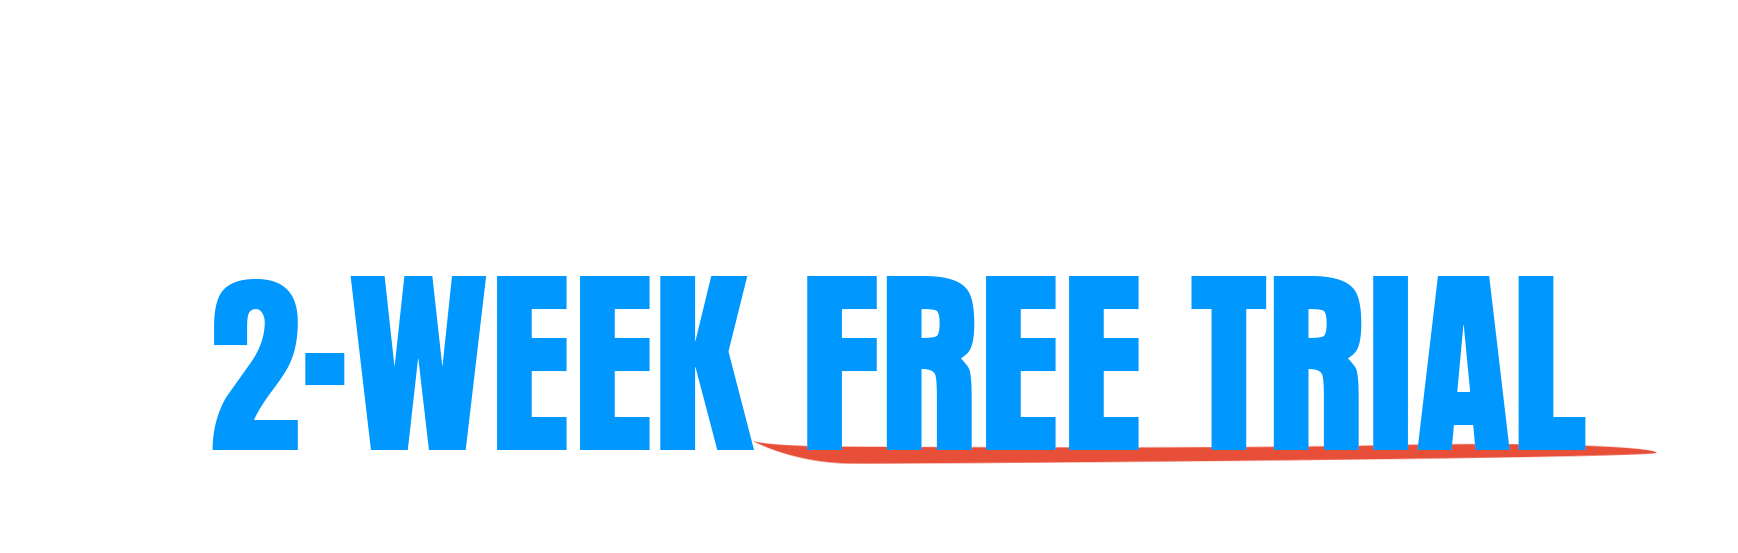 Build Unlimited Funnels With A 2-Week Free Trial of ClickFunnels!